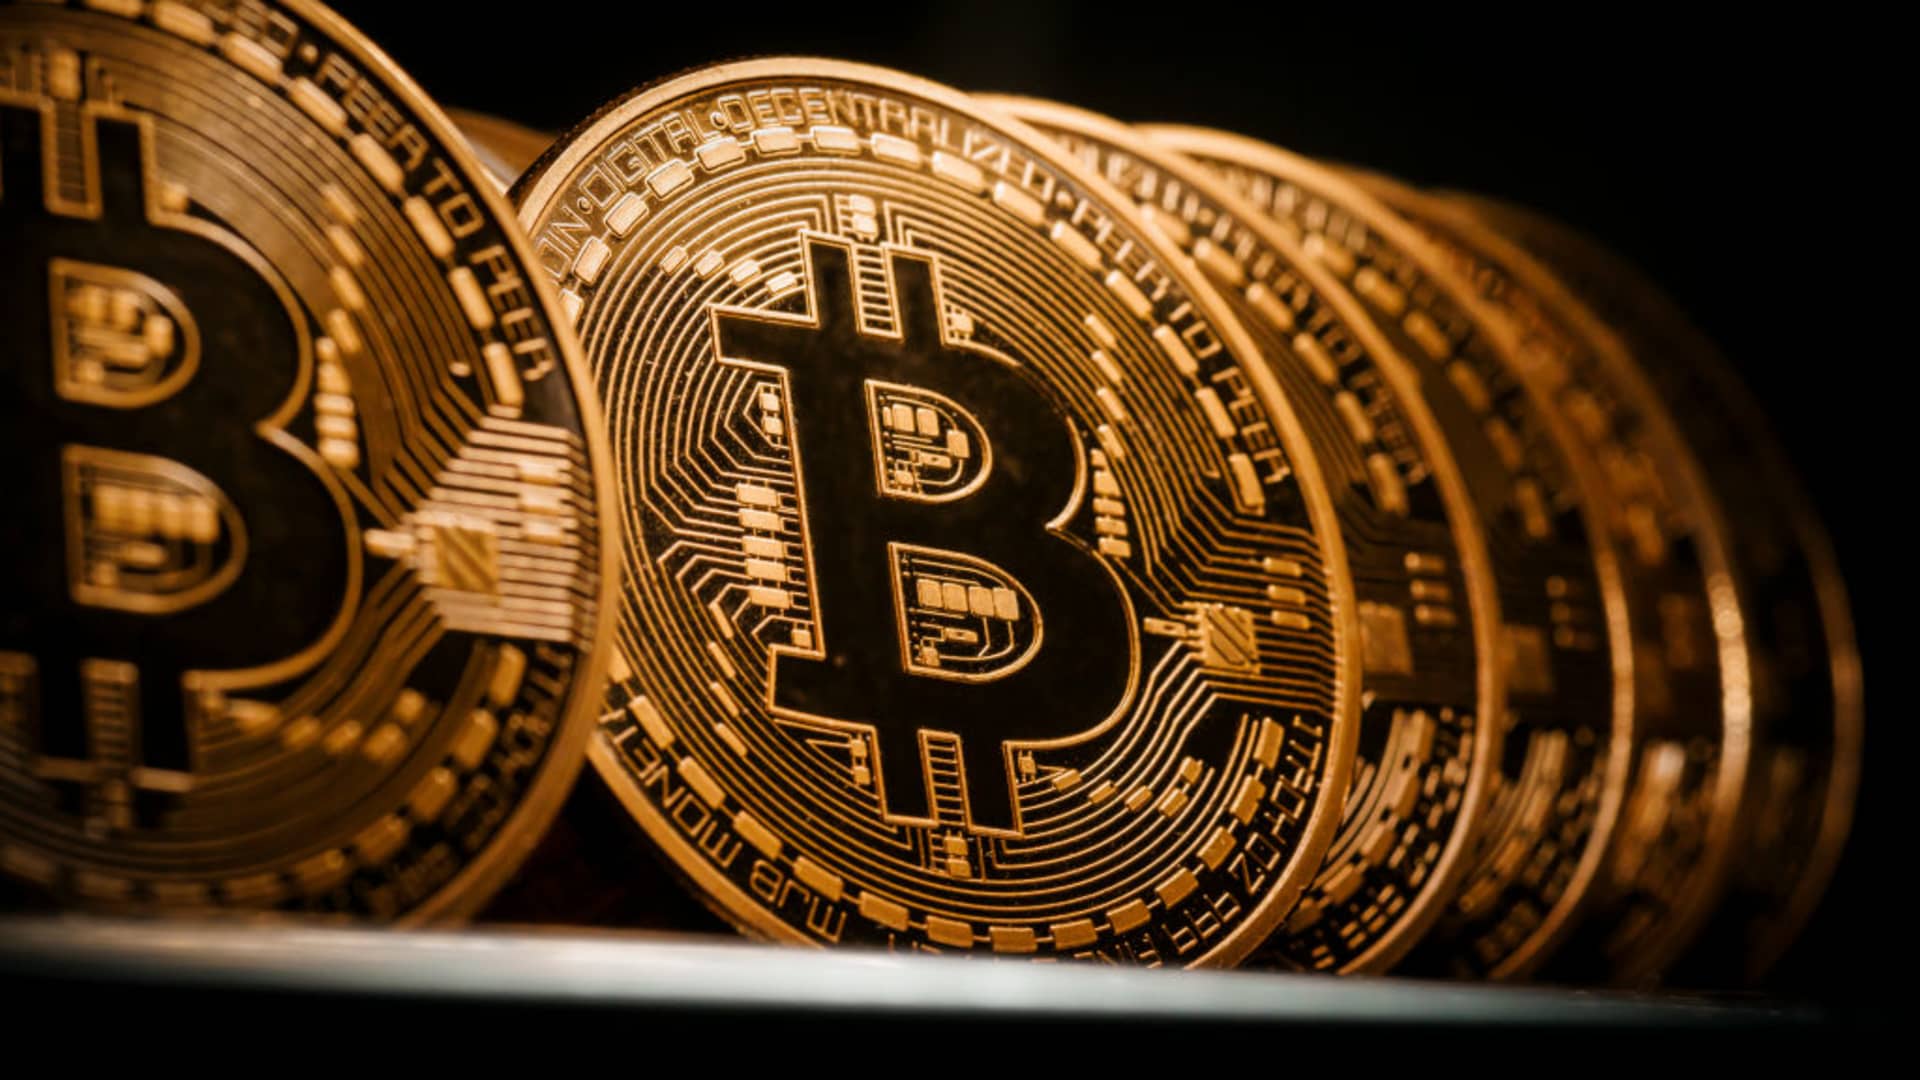 Mt. Gox begins repaying bitcoin to creditors a decade on from collapse